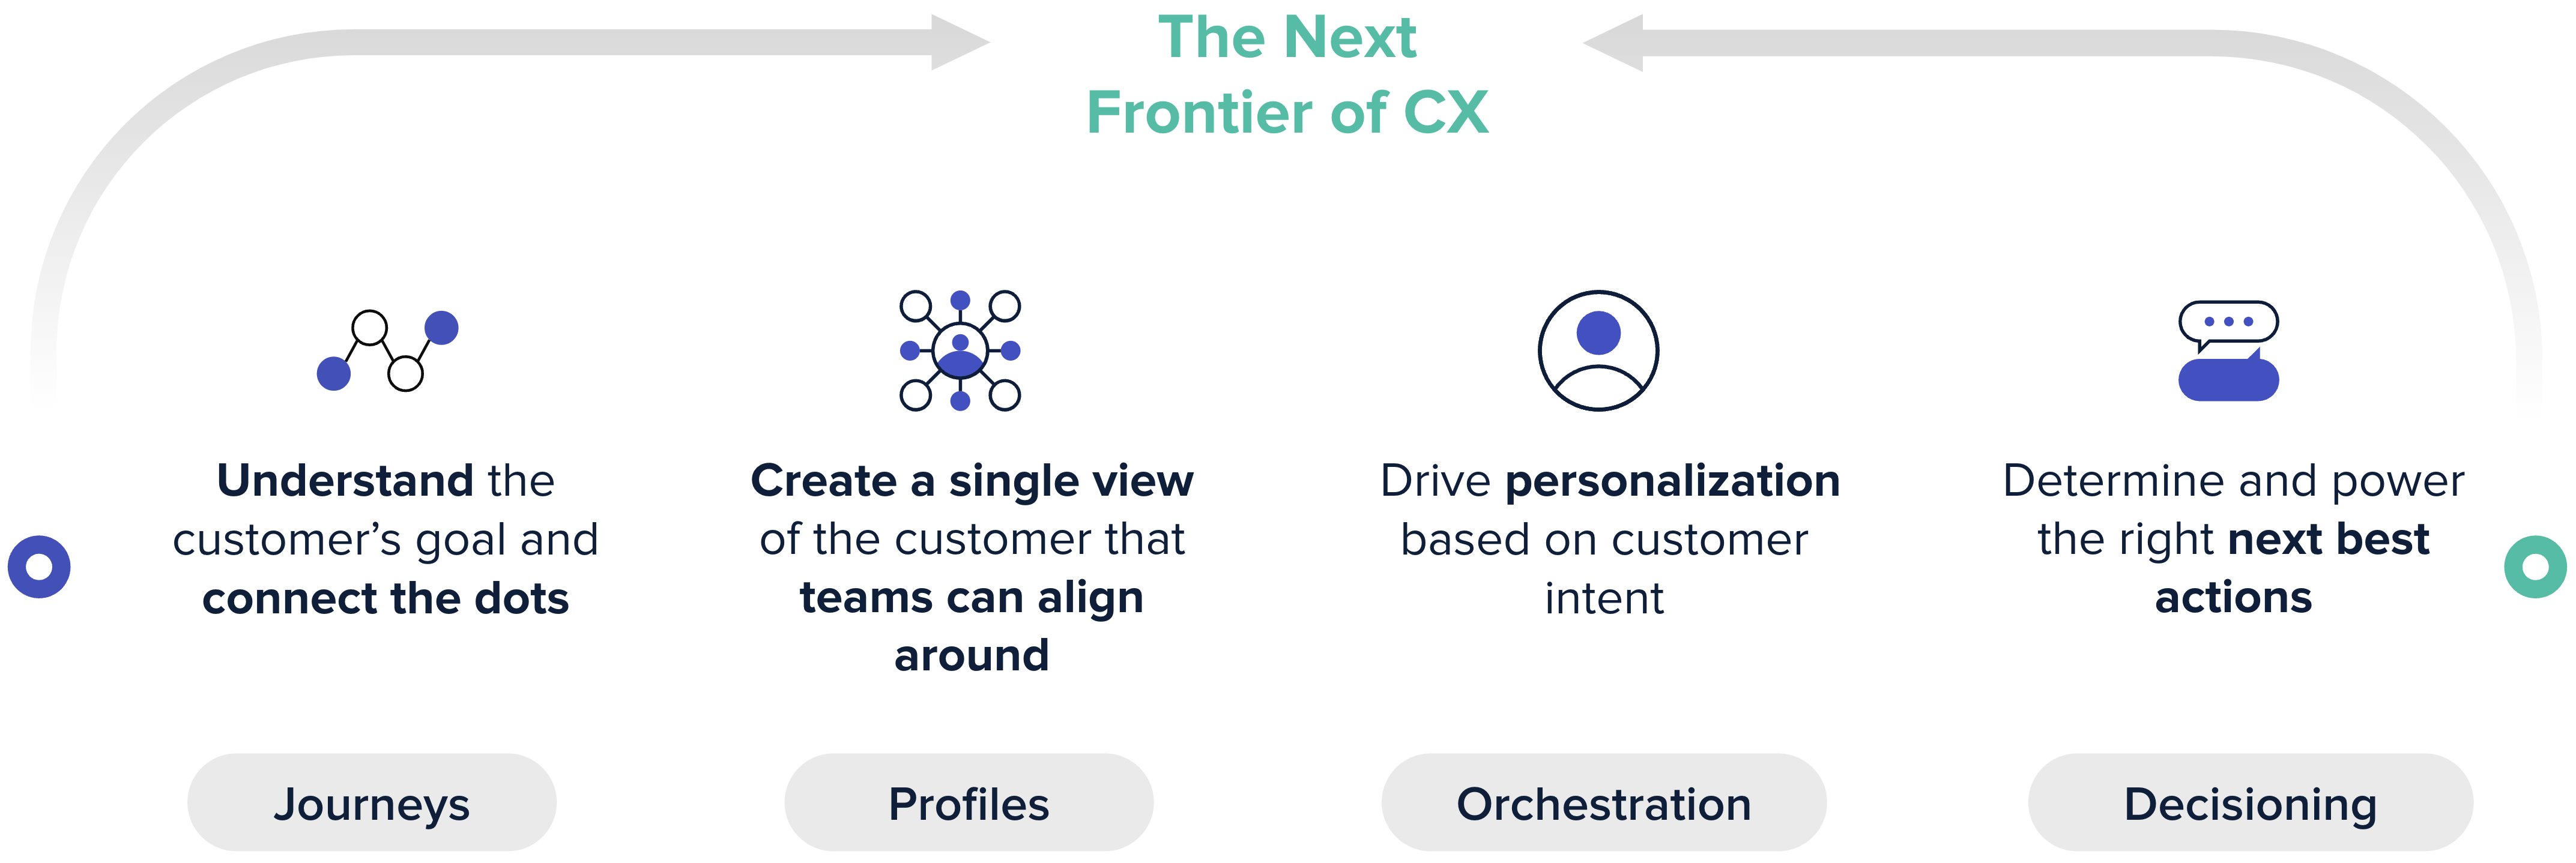 1) Understand the customer’s goal and connect the dots (Journeys) 2) Create a single view of the customer that teams can align around (Profiles) 3) Drive personalization based on customer intent (Orchestration) 4) Determine and power the right next best actions (Decisioning)